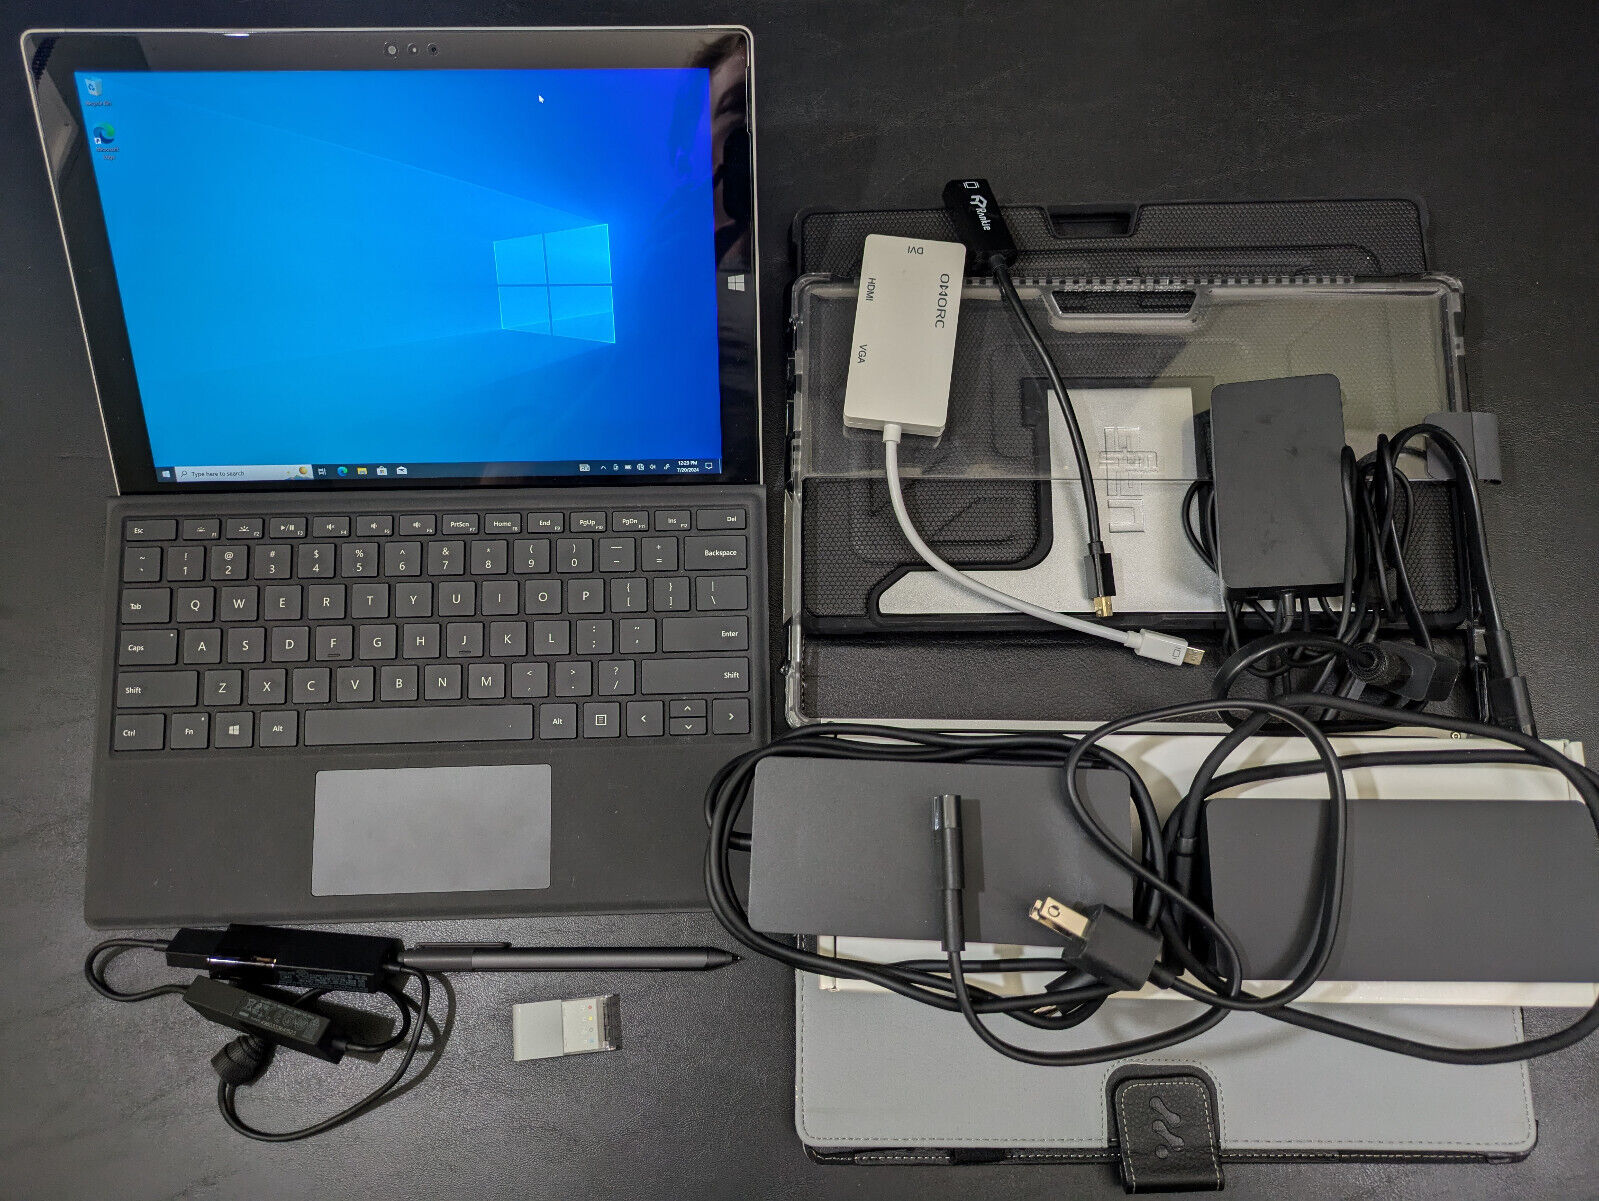 Surface Pro 3 i5 128GB, Surface Dock, Display Adaptor 1733, & More - Many Photos